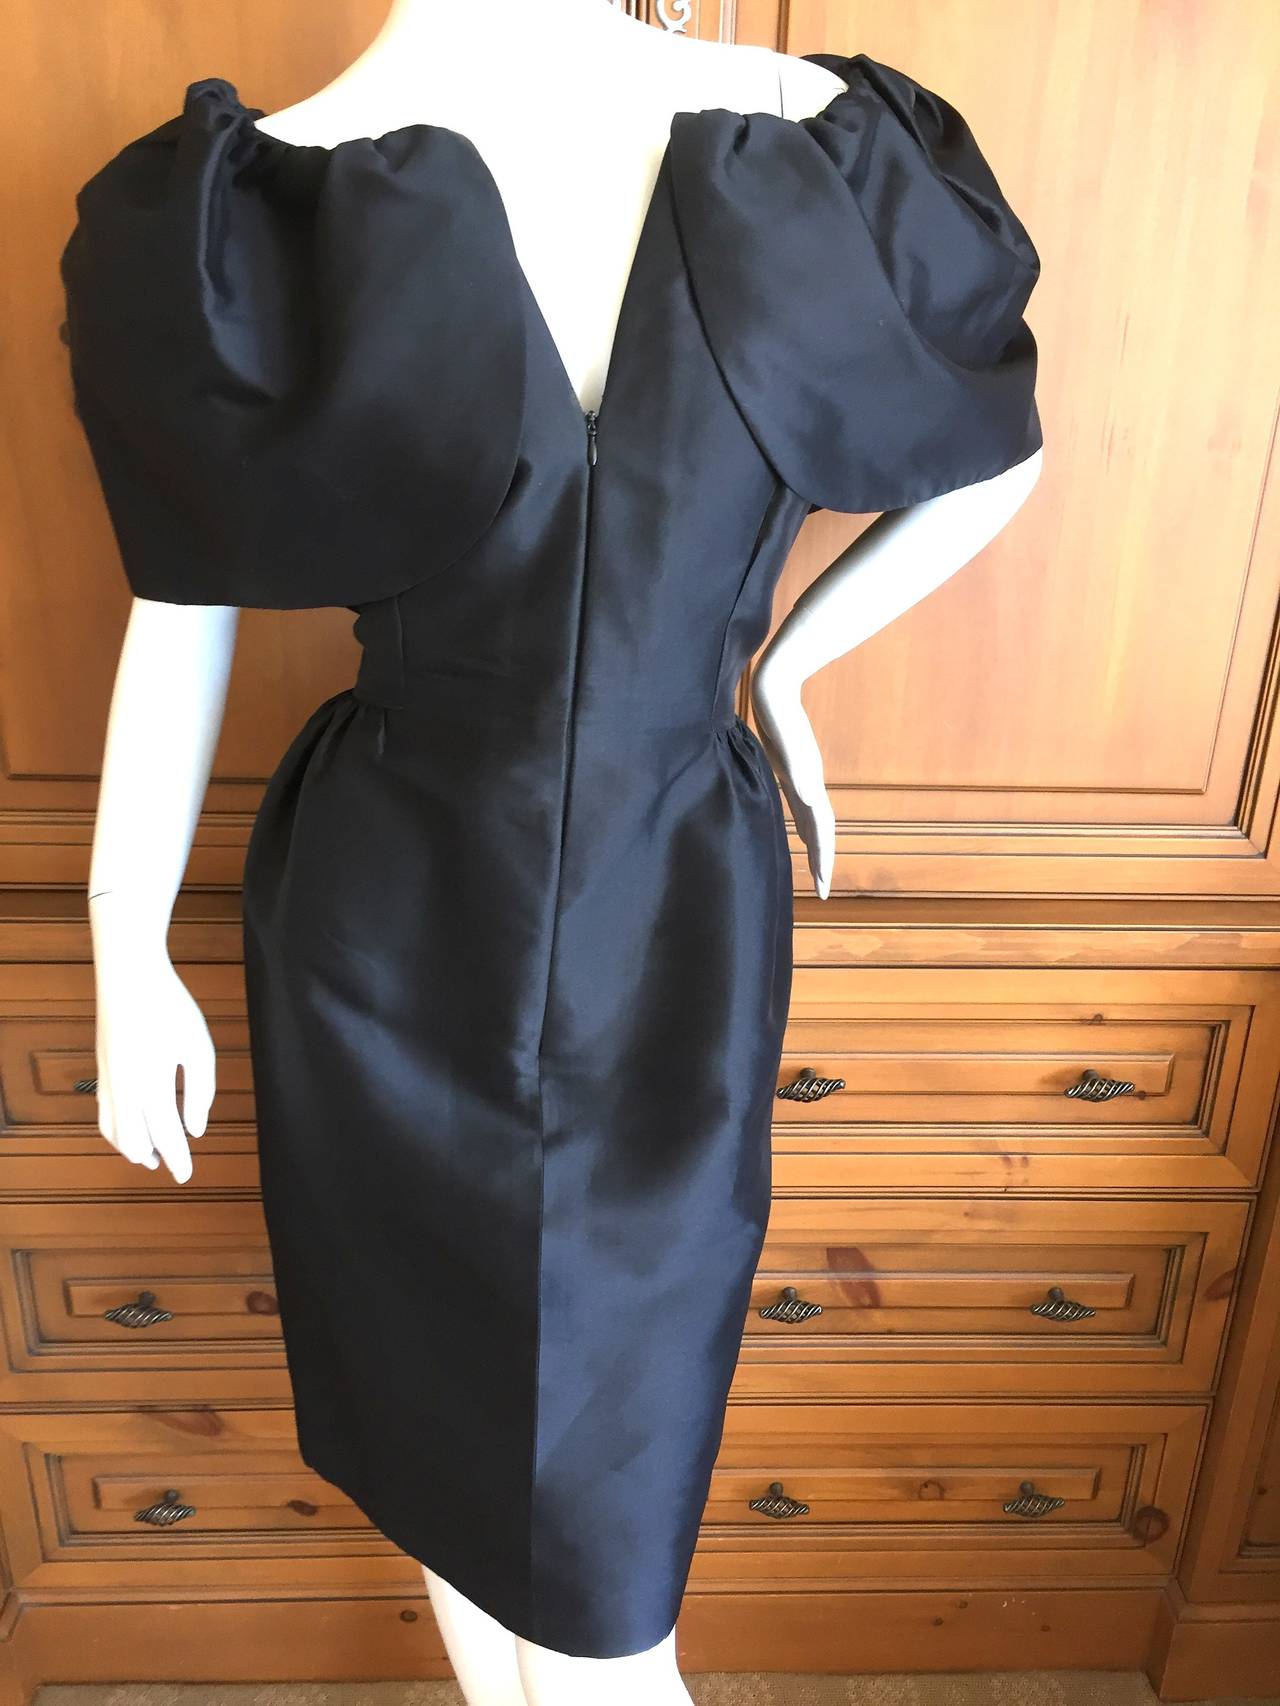 Oscar de la Renta for Elizabeth Arden LBD with Capelet.
This is an early Oscar while he was just beginning on his own after working designing for Elizabeth Arden.